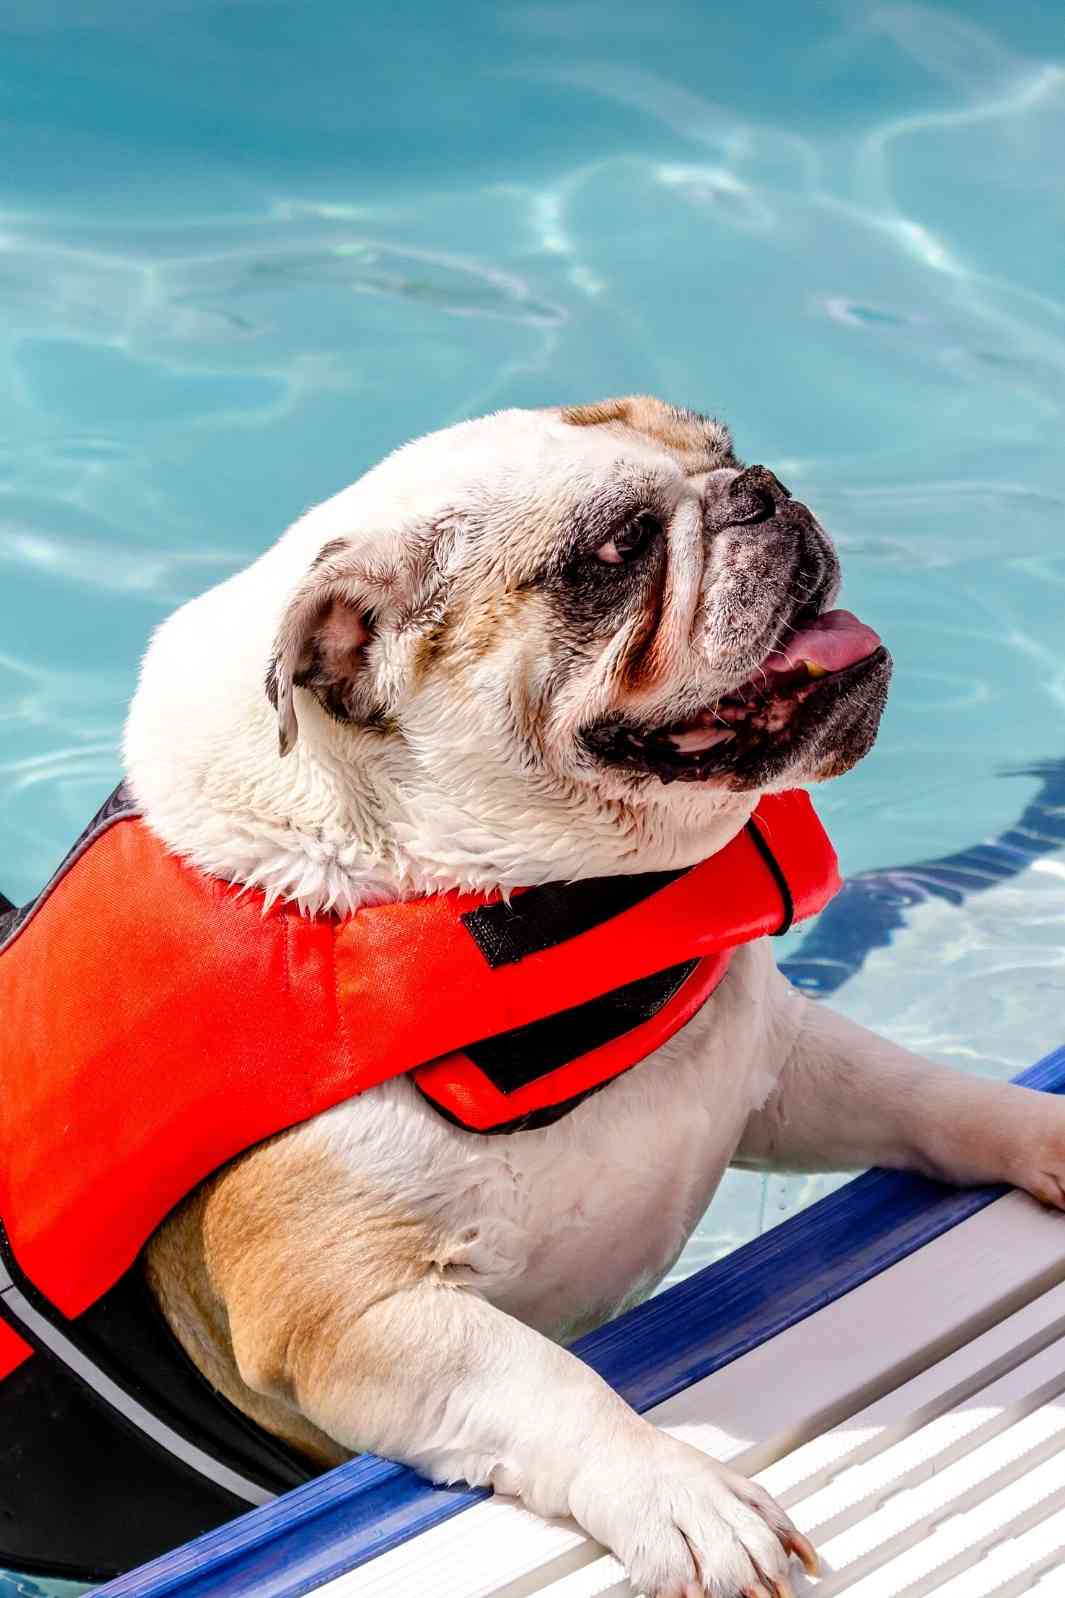 English Bulldog with tongue out, climbing out of a swimming pool wearing a red life jacket.